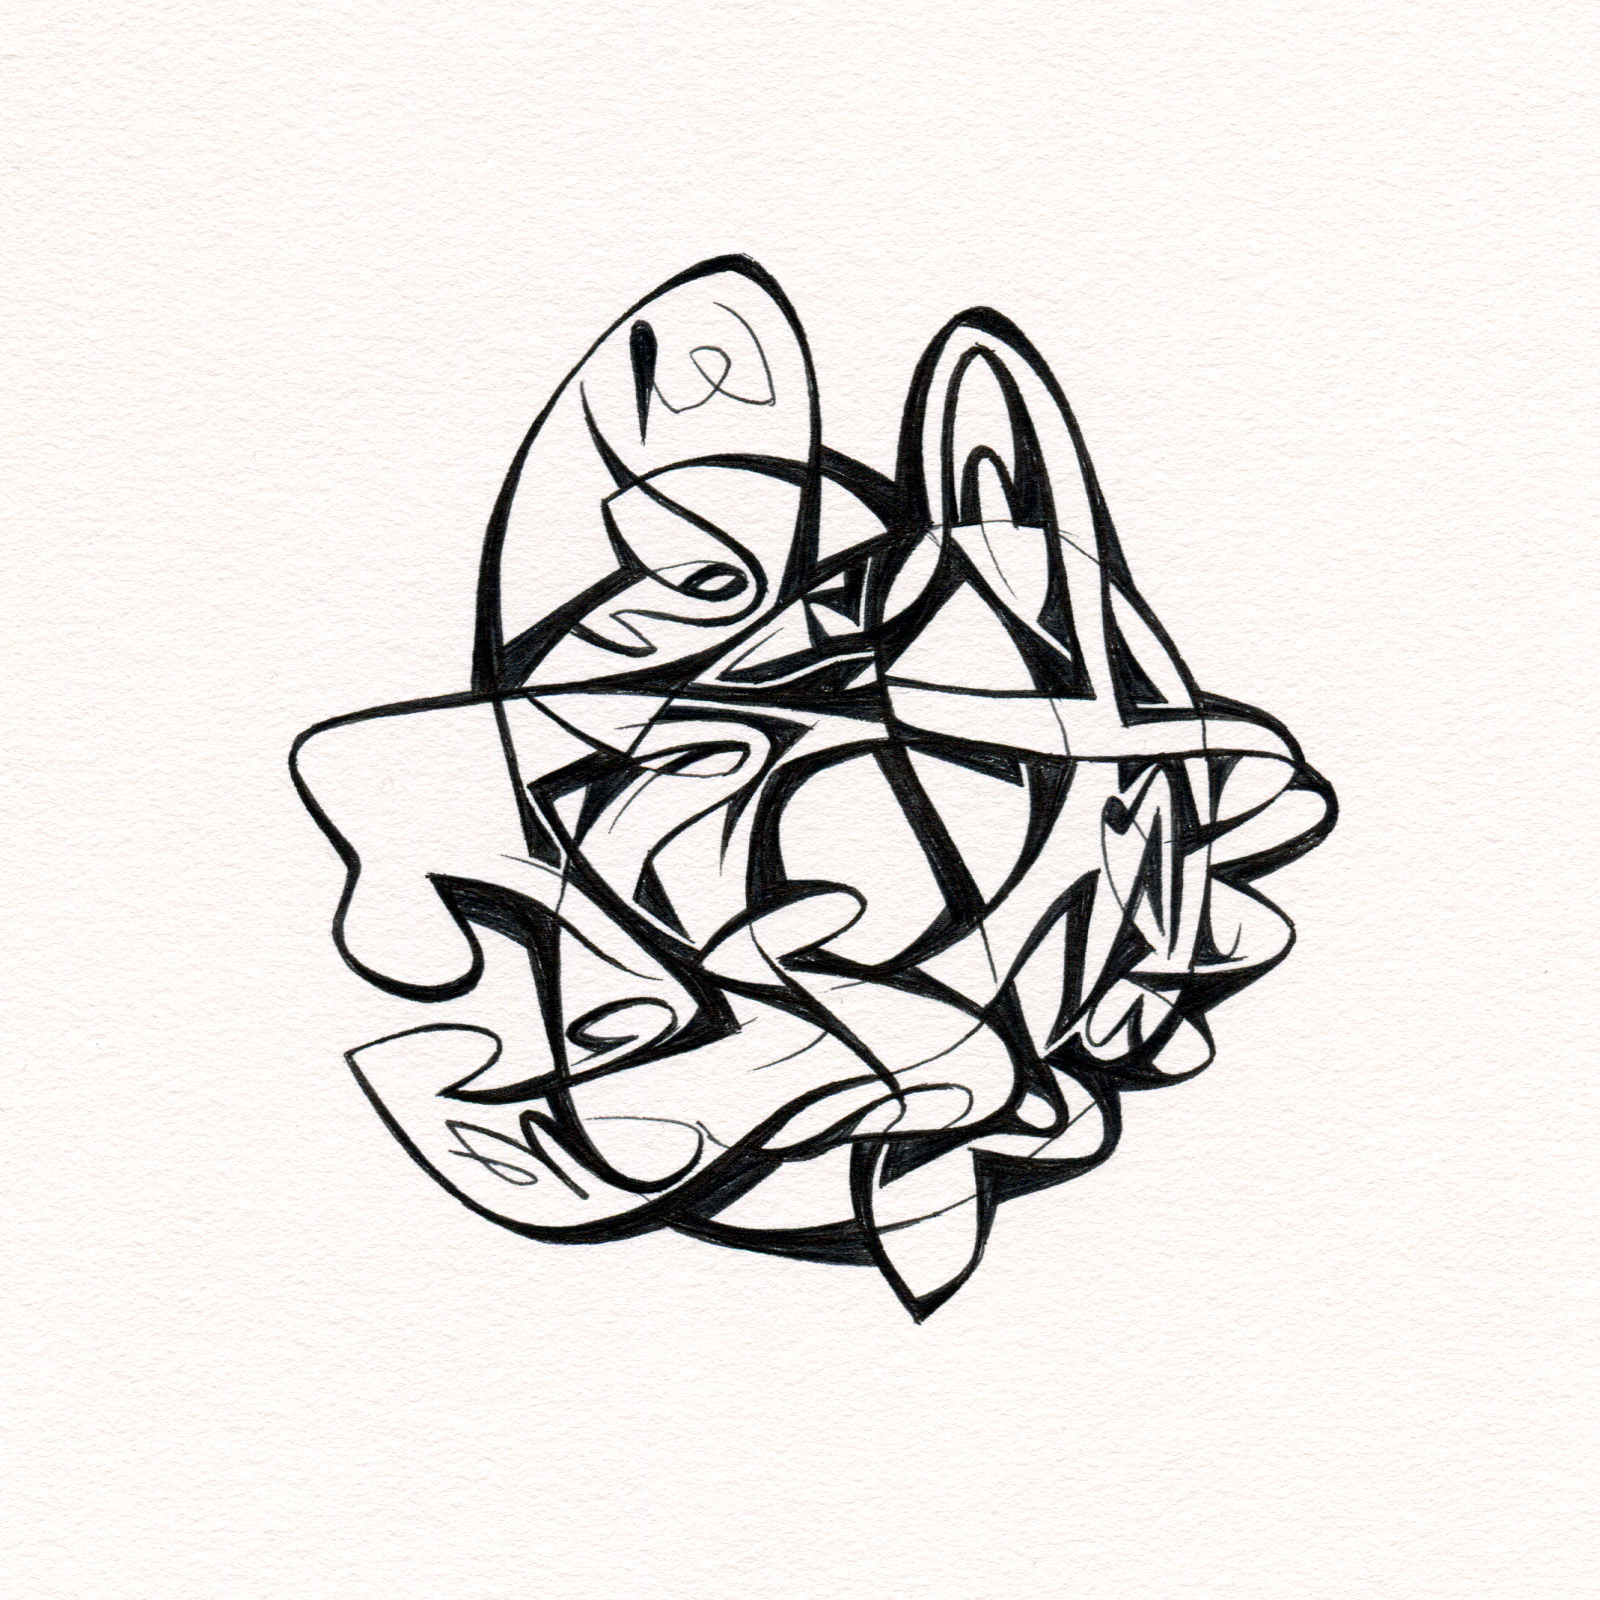   Untitled Ink Drawing #59 , 2015. Ink on paper. Approximately 5" x 5". 